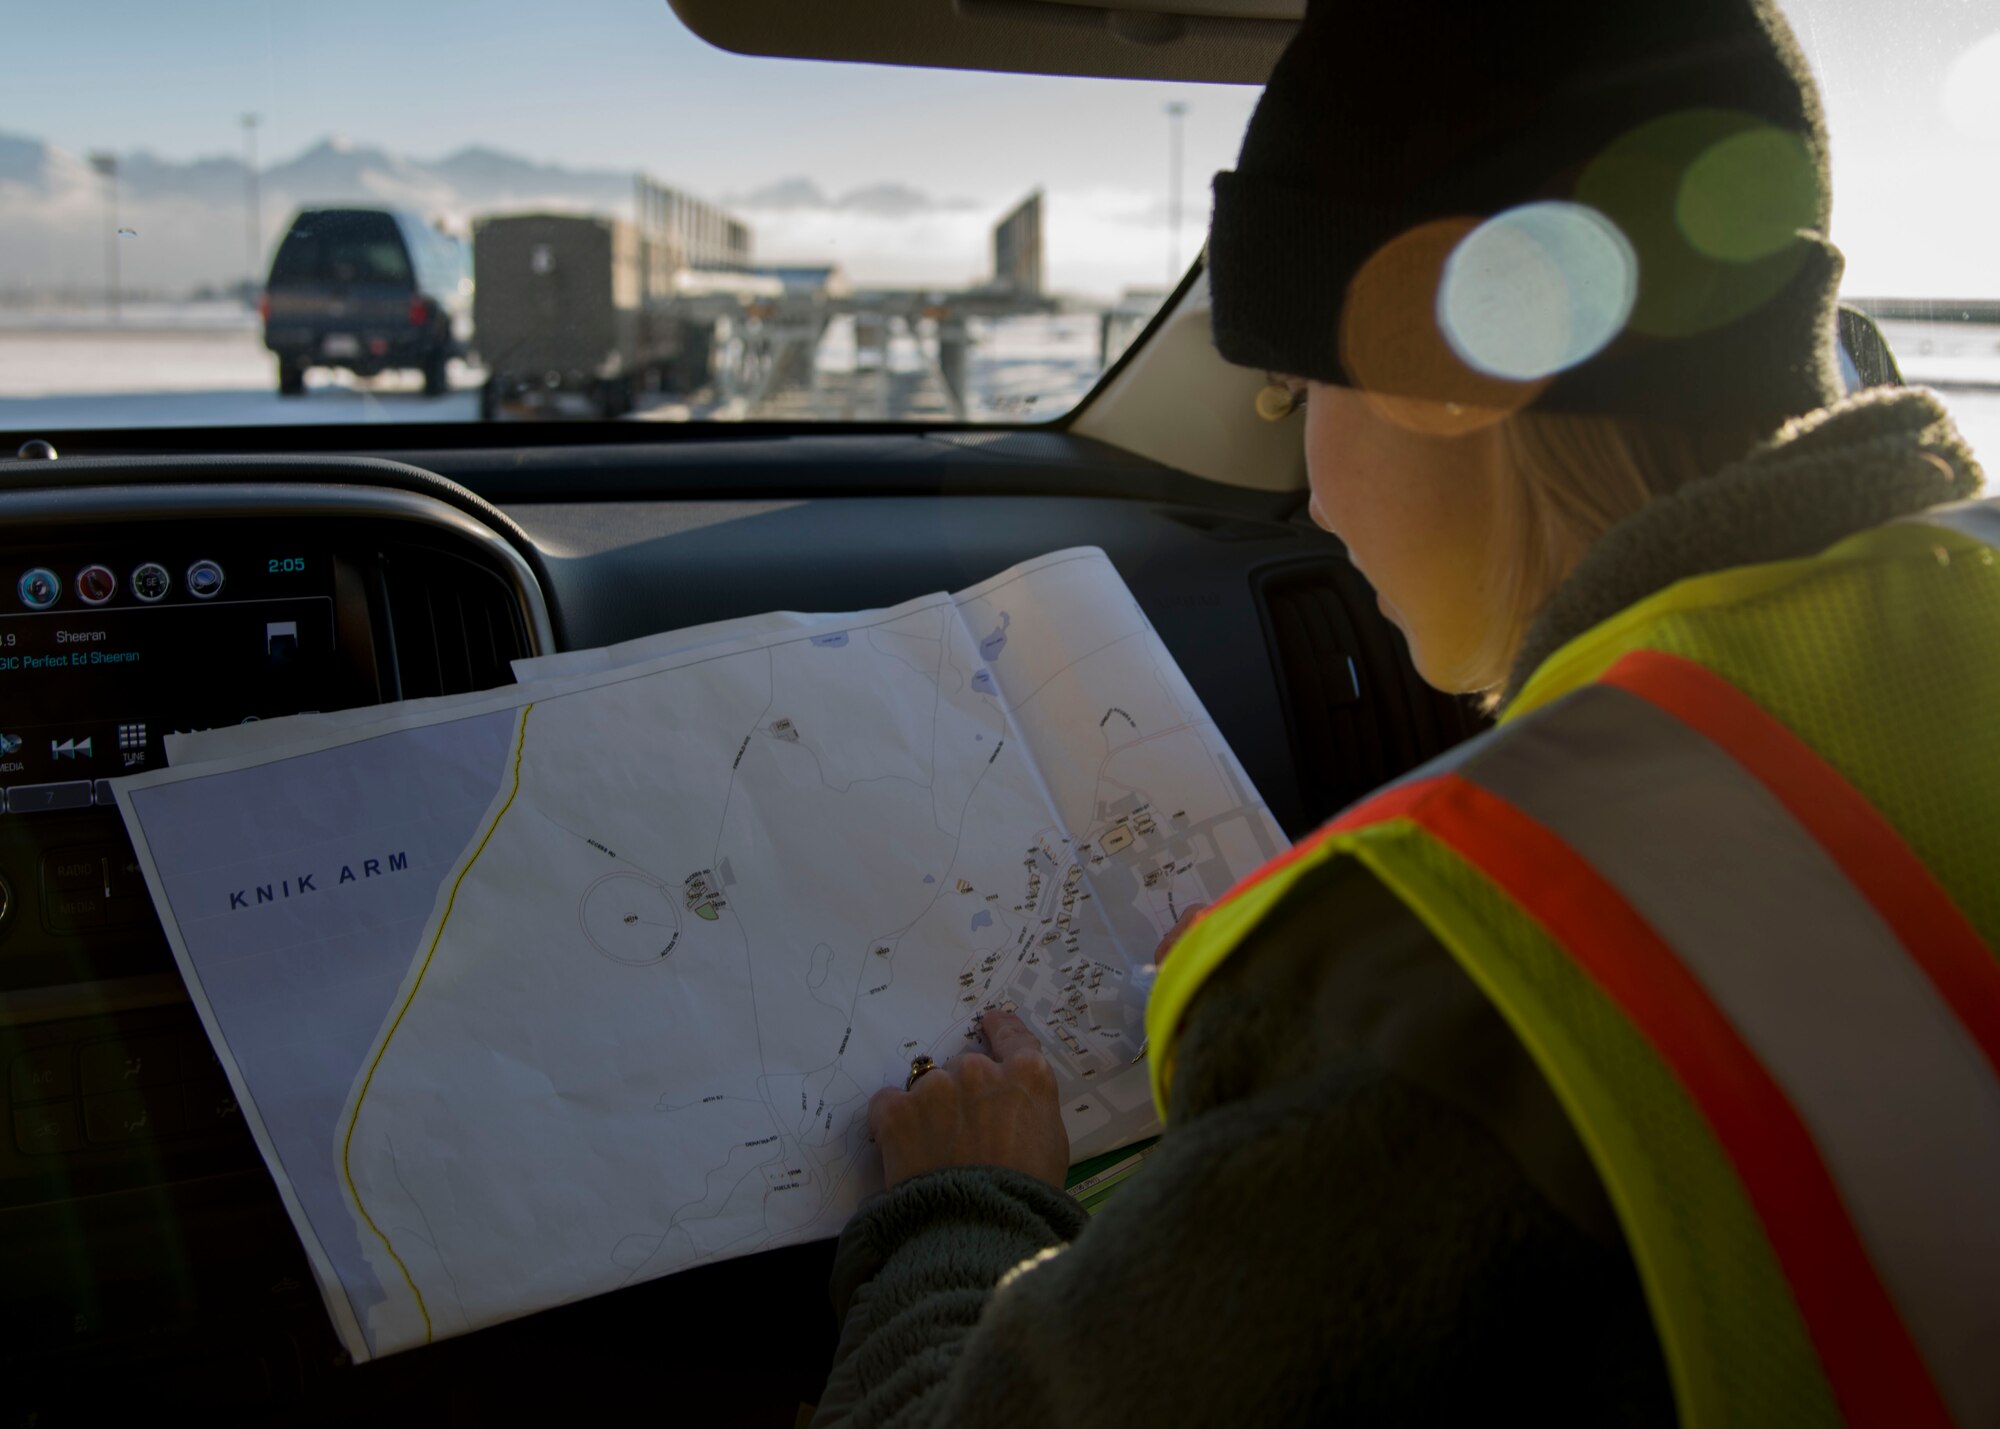 U.S. Air Force Staff Sgt. Courtney Kohnke, 673d Civil Engineer Squadron construction inspector, looks at a map of facilities at Joint Base Elmendorf-Richardson, Alaska, Jan. 31, 2019. Since the Nov. 30, 2018 earthquake more than 20 CES Airmen have been trained in the ATC-20-1 Post-earthquake Safety Evaluation of Buildings to maintain and improve agile support capabilities. A level-four category is for facilities used seasonally or infrequently.